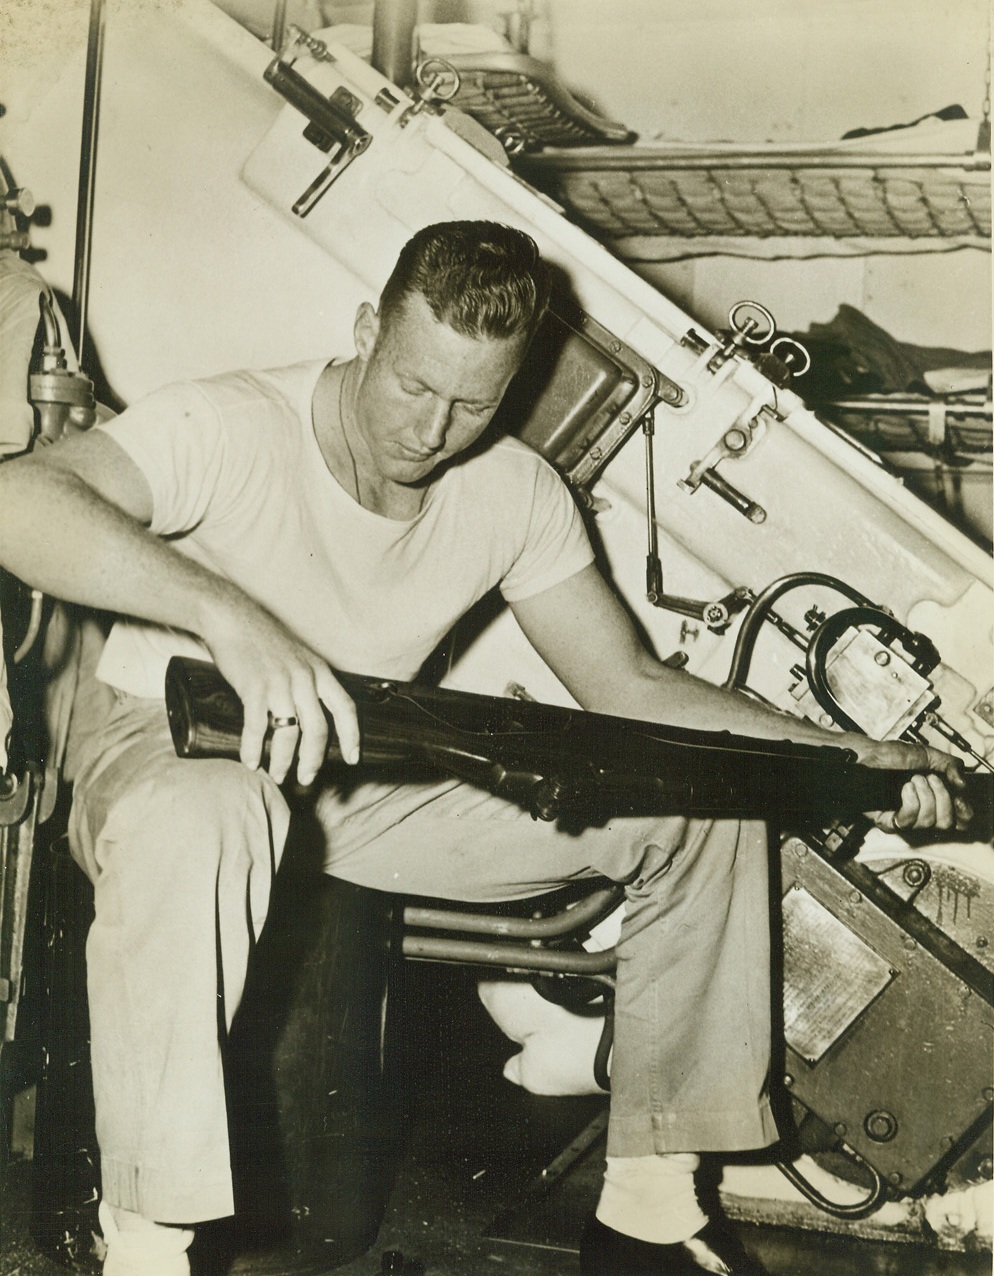 A Marine and His Pal at Sea with Fleet, 4/18/1942. At Sea – If every husband gave his wife the loving care that a U.S. Marine gives to his rifle—there would be nary a divorce. This Leatherneck is grooming his weapon while off duty aboard one of the heavy-hitting units of the U.S. Atlantic Fleet on the ocean highways of Europe. Approved by U.S. Navy. Credit: ACME;